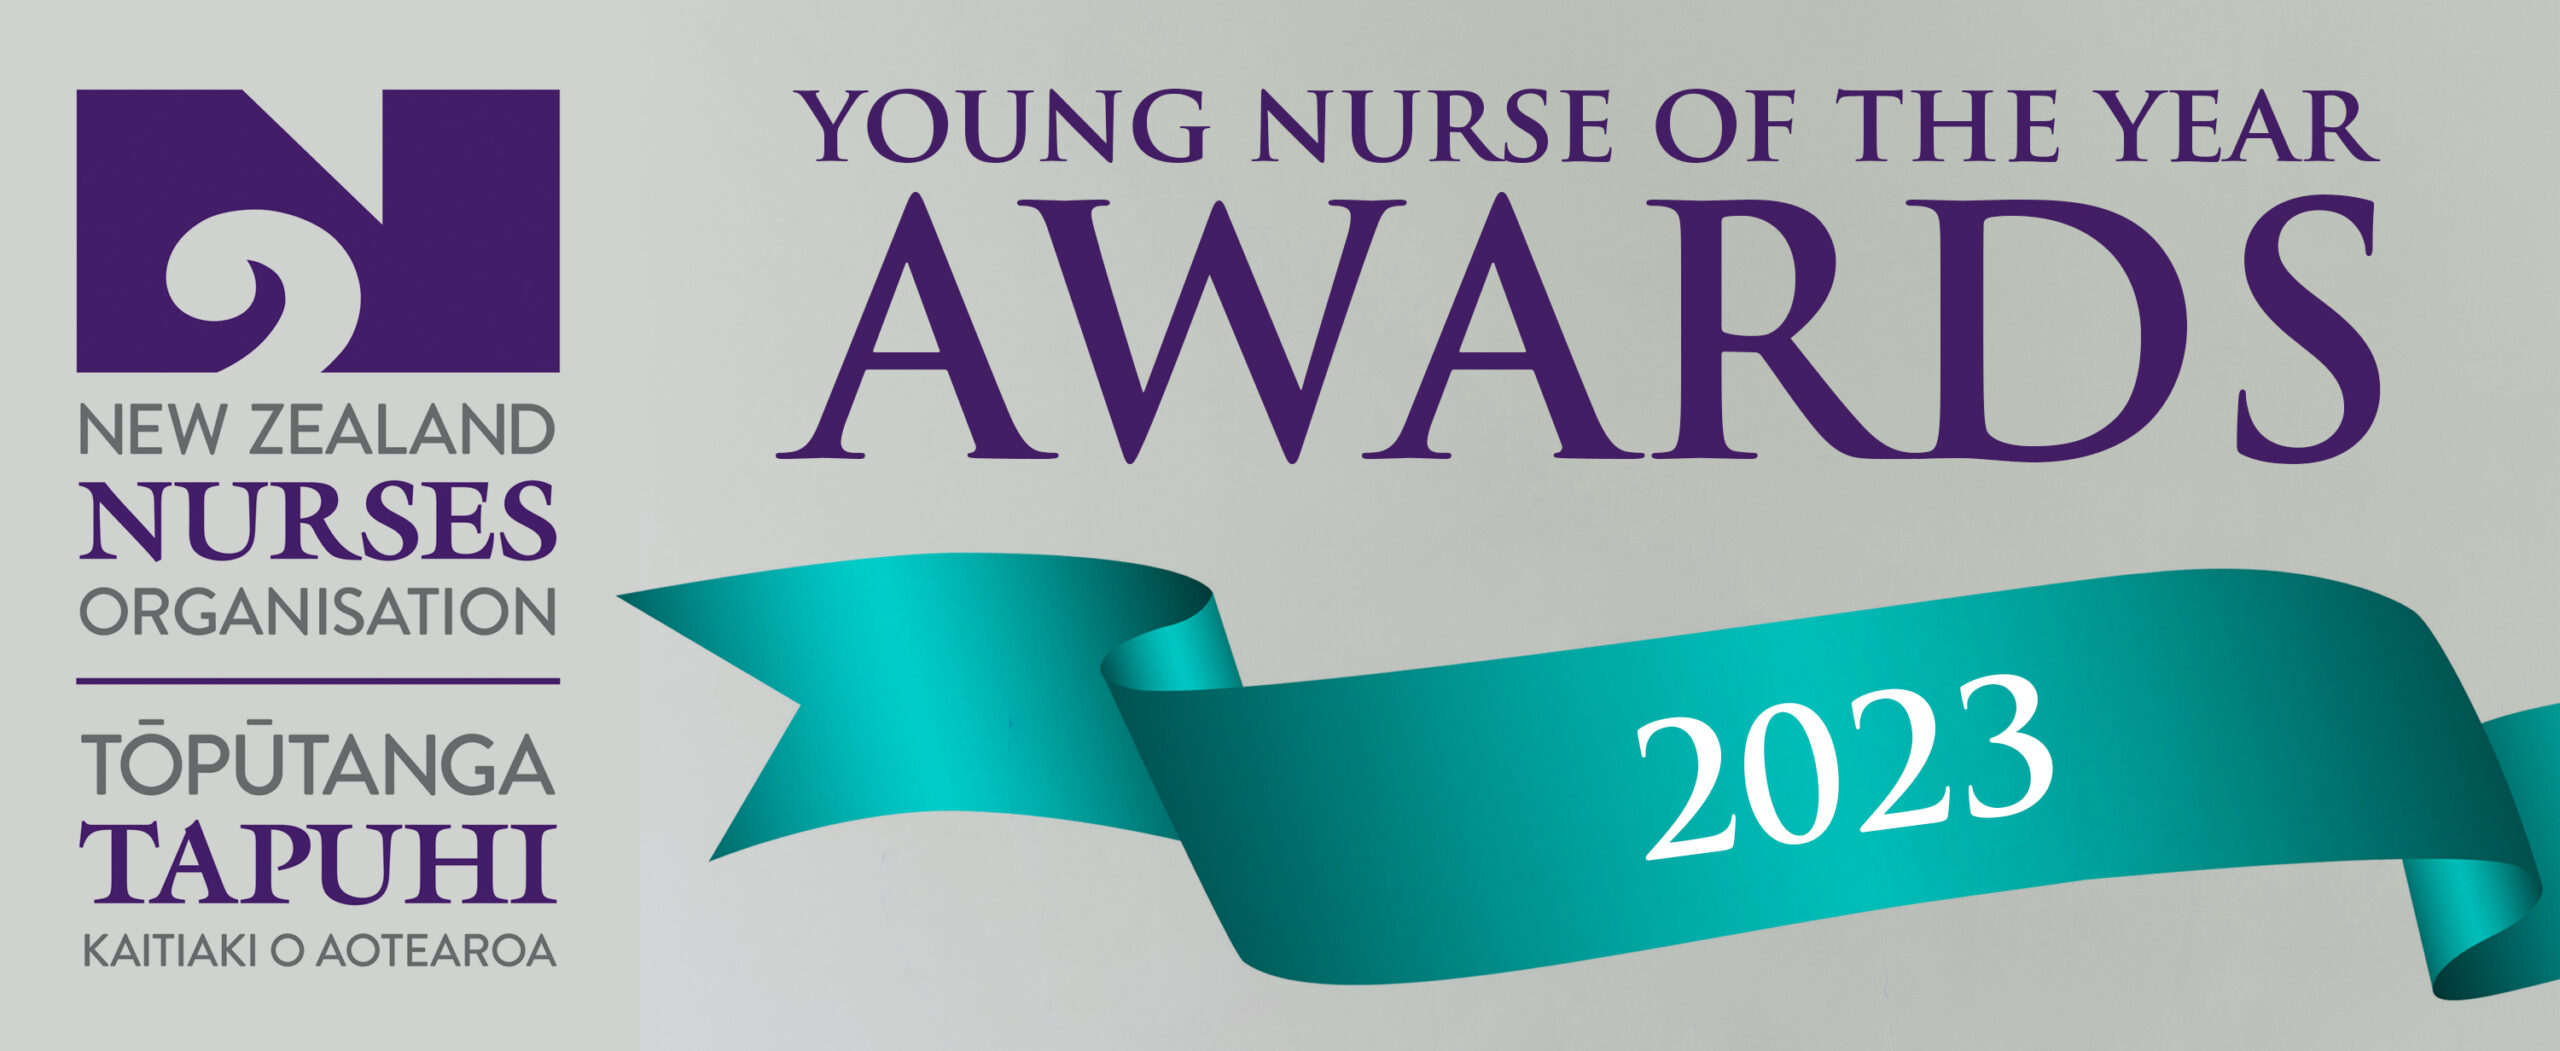 Young Nurse of the Year awards 2023